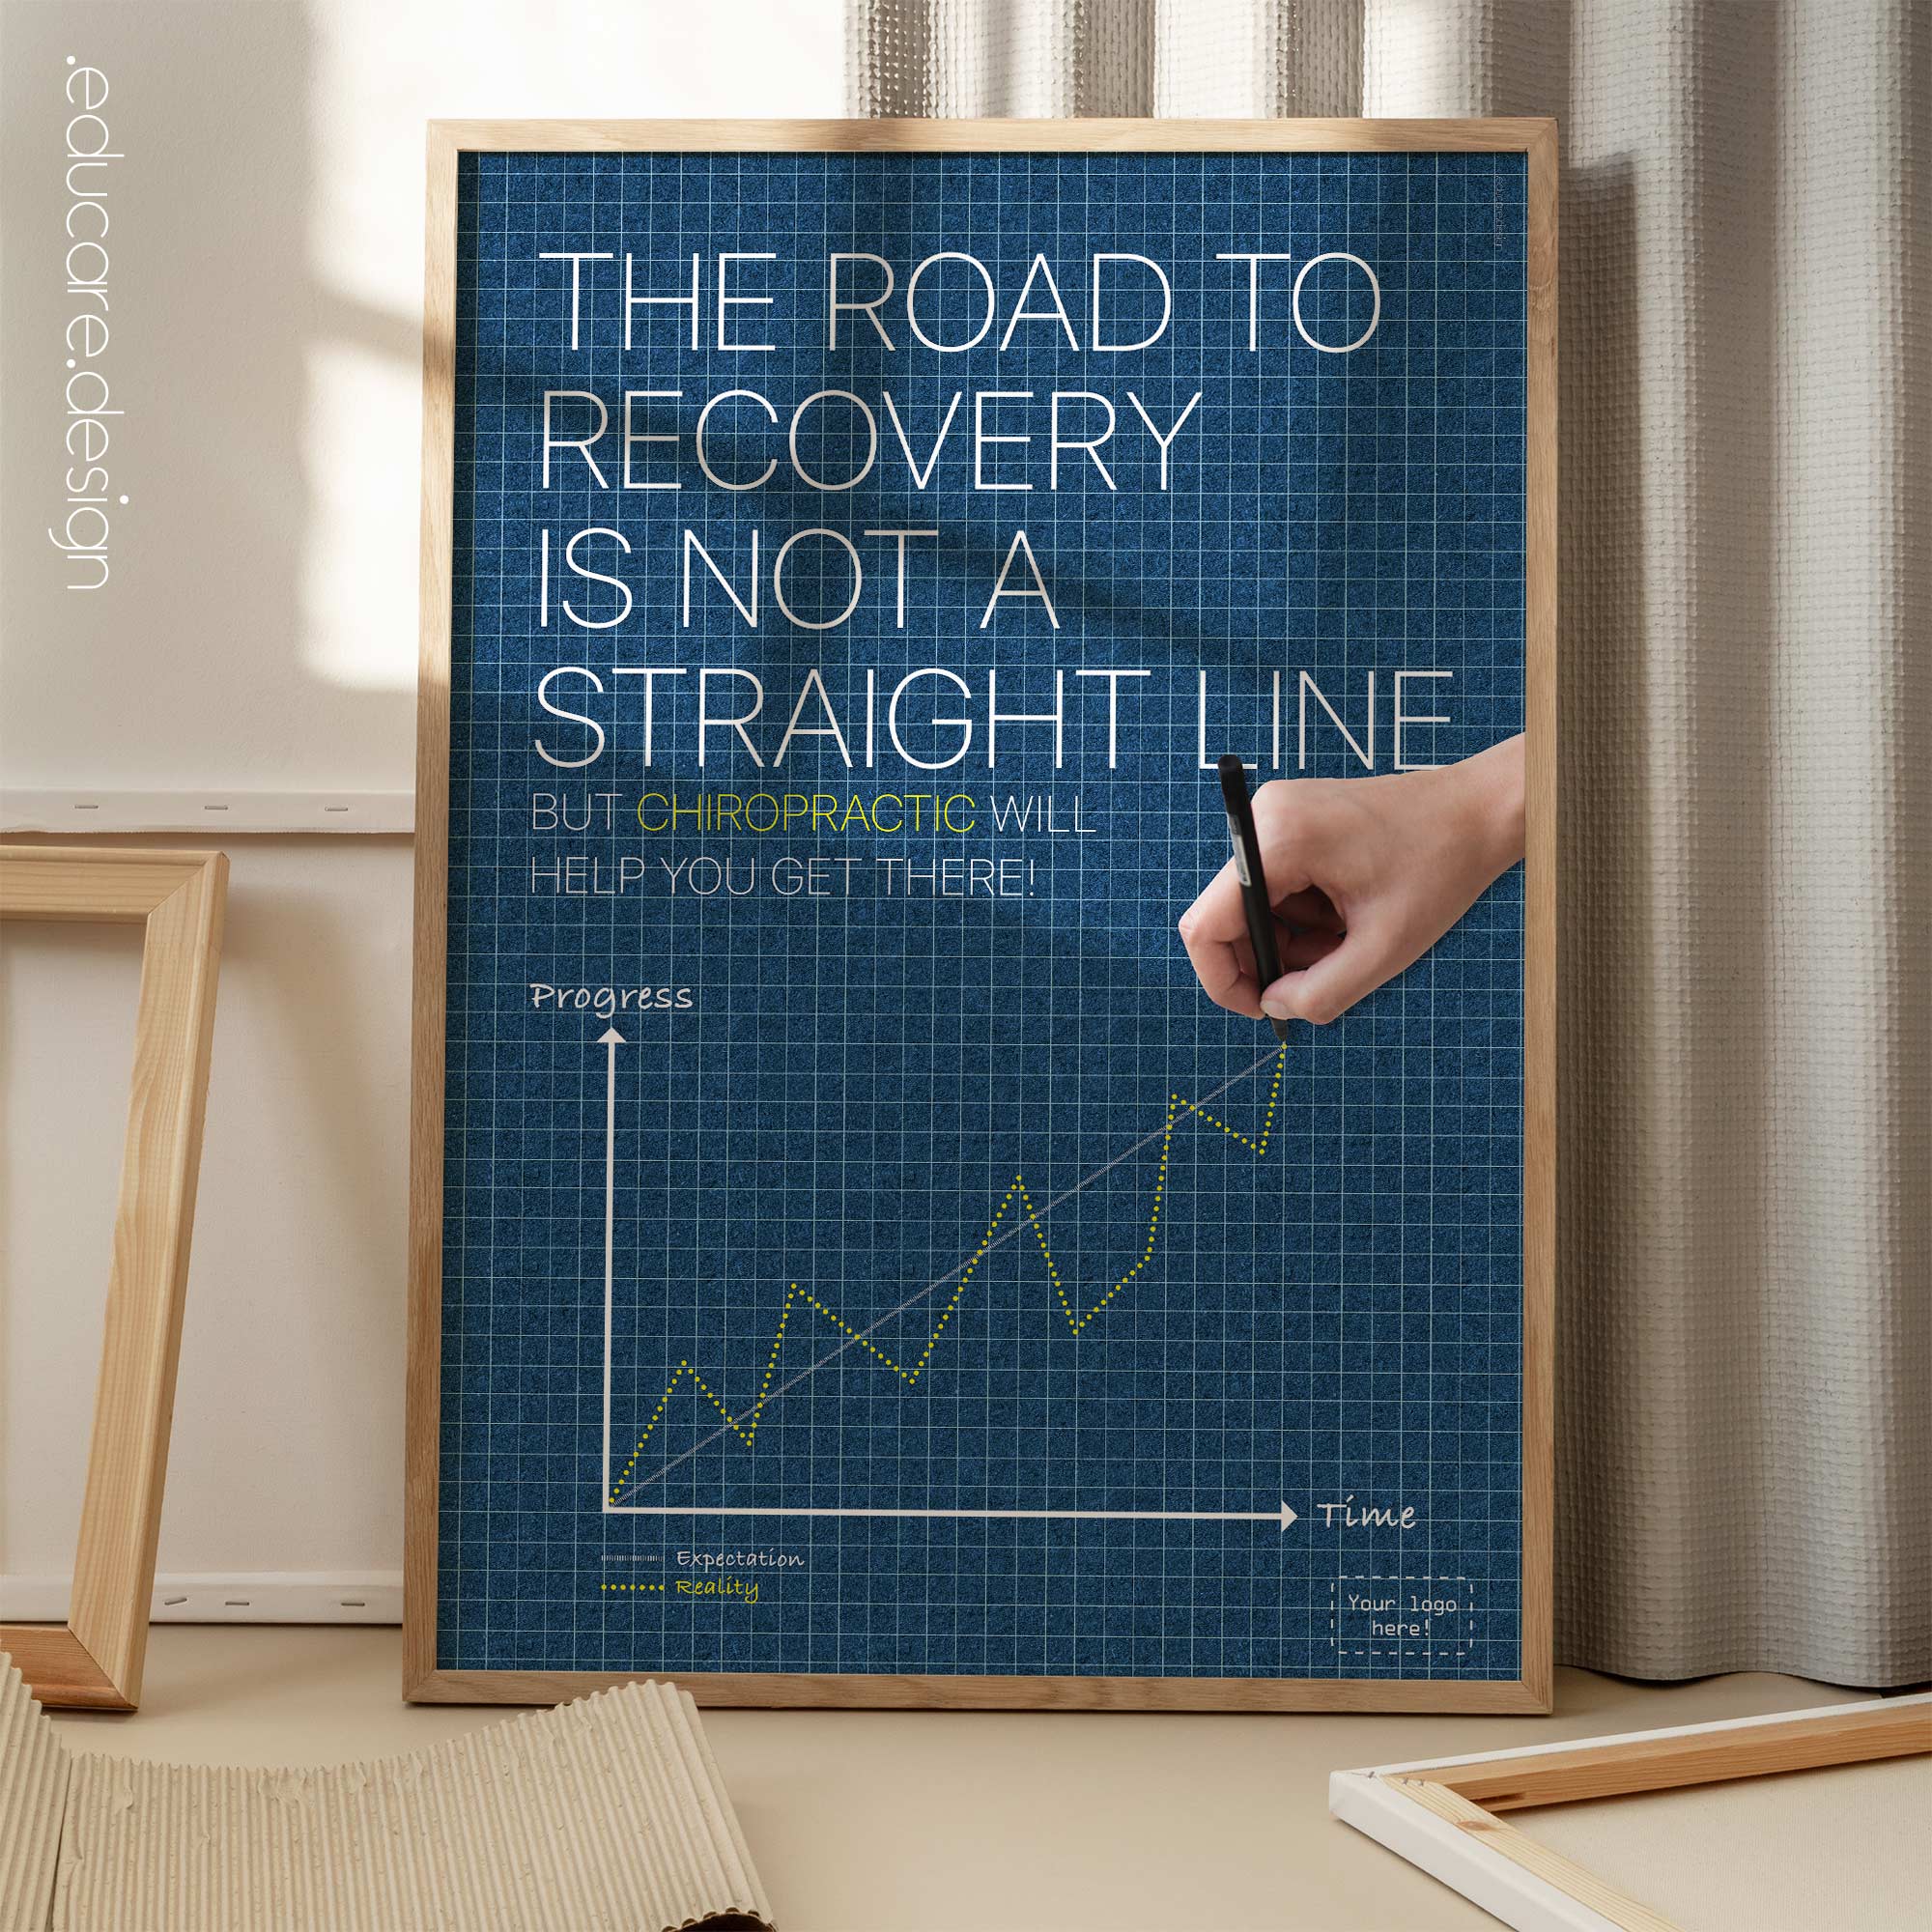 Chiropractic Road to Recovery. Chiropractic poster from www.educare.design